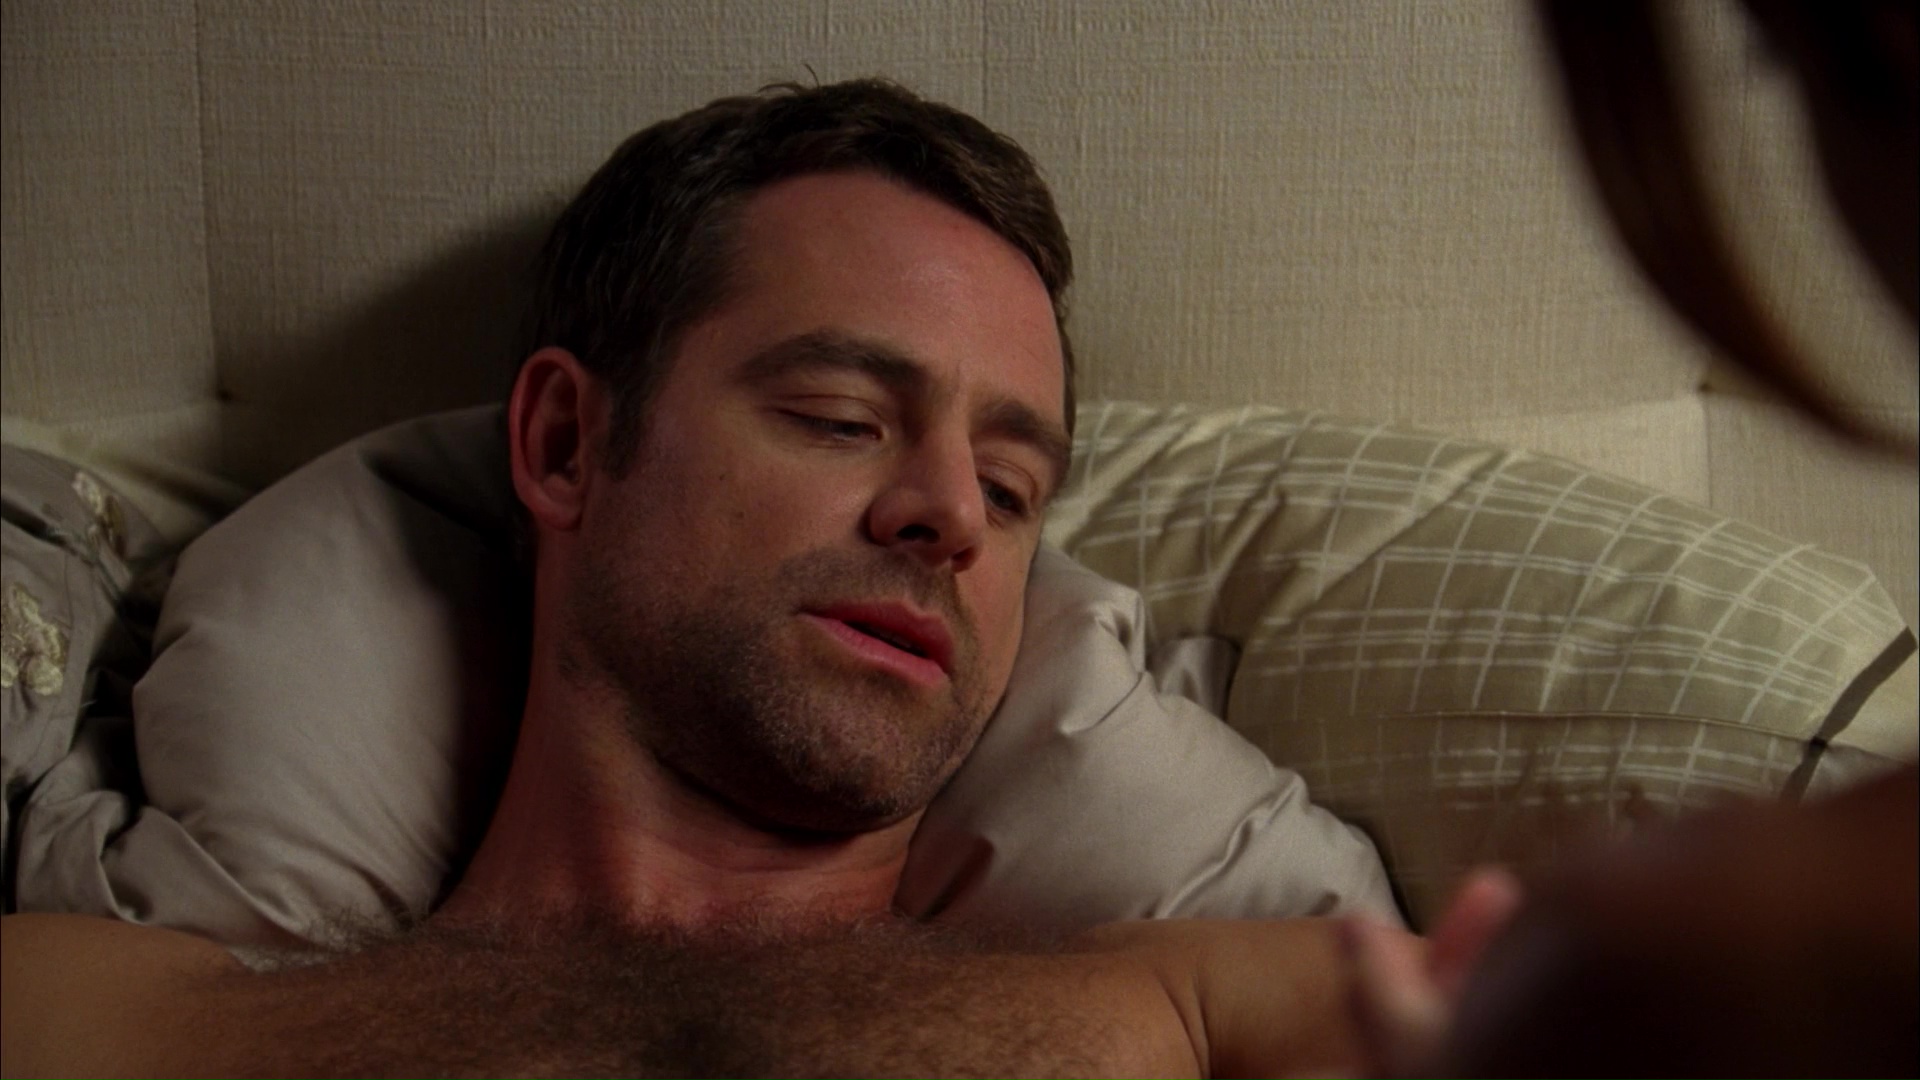 David Sutcliffe shirtless in Private Practice 2-08 "Crime And Punishme...